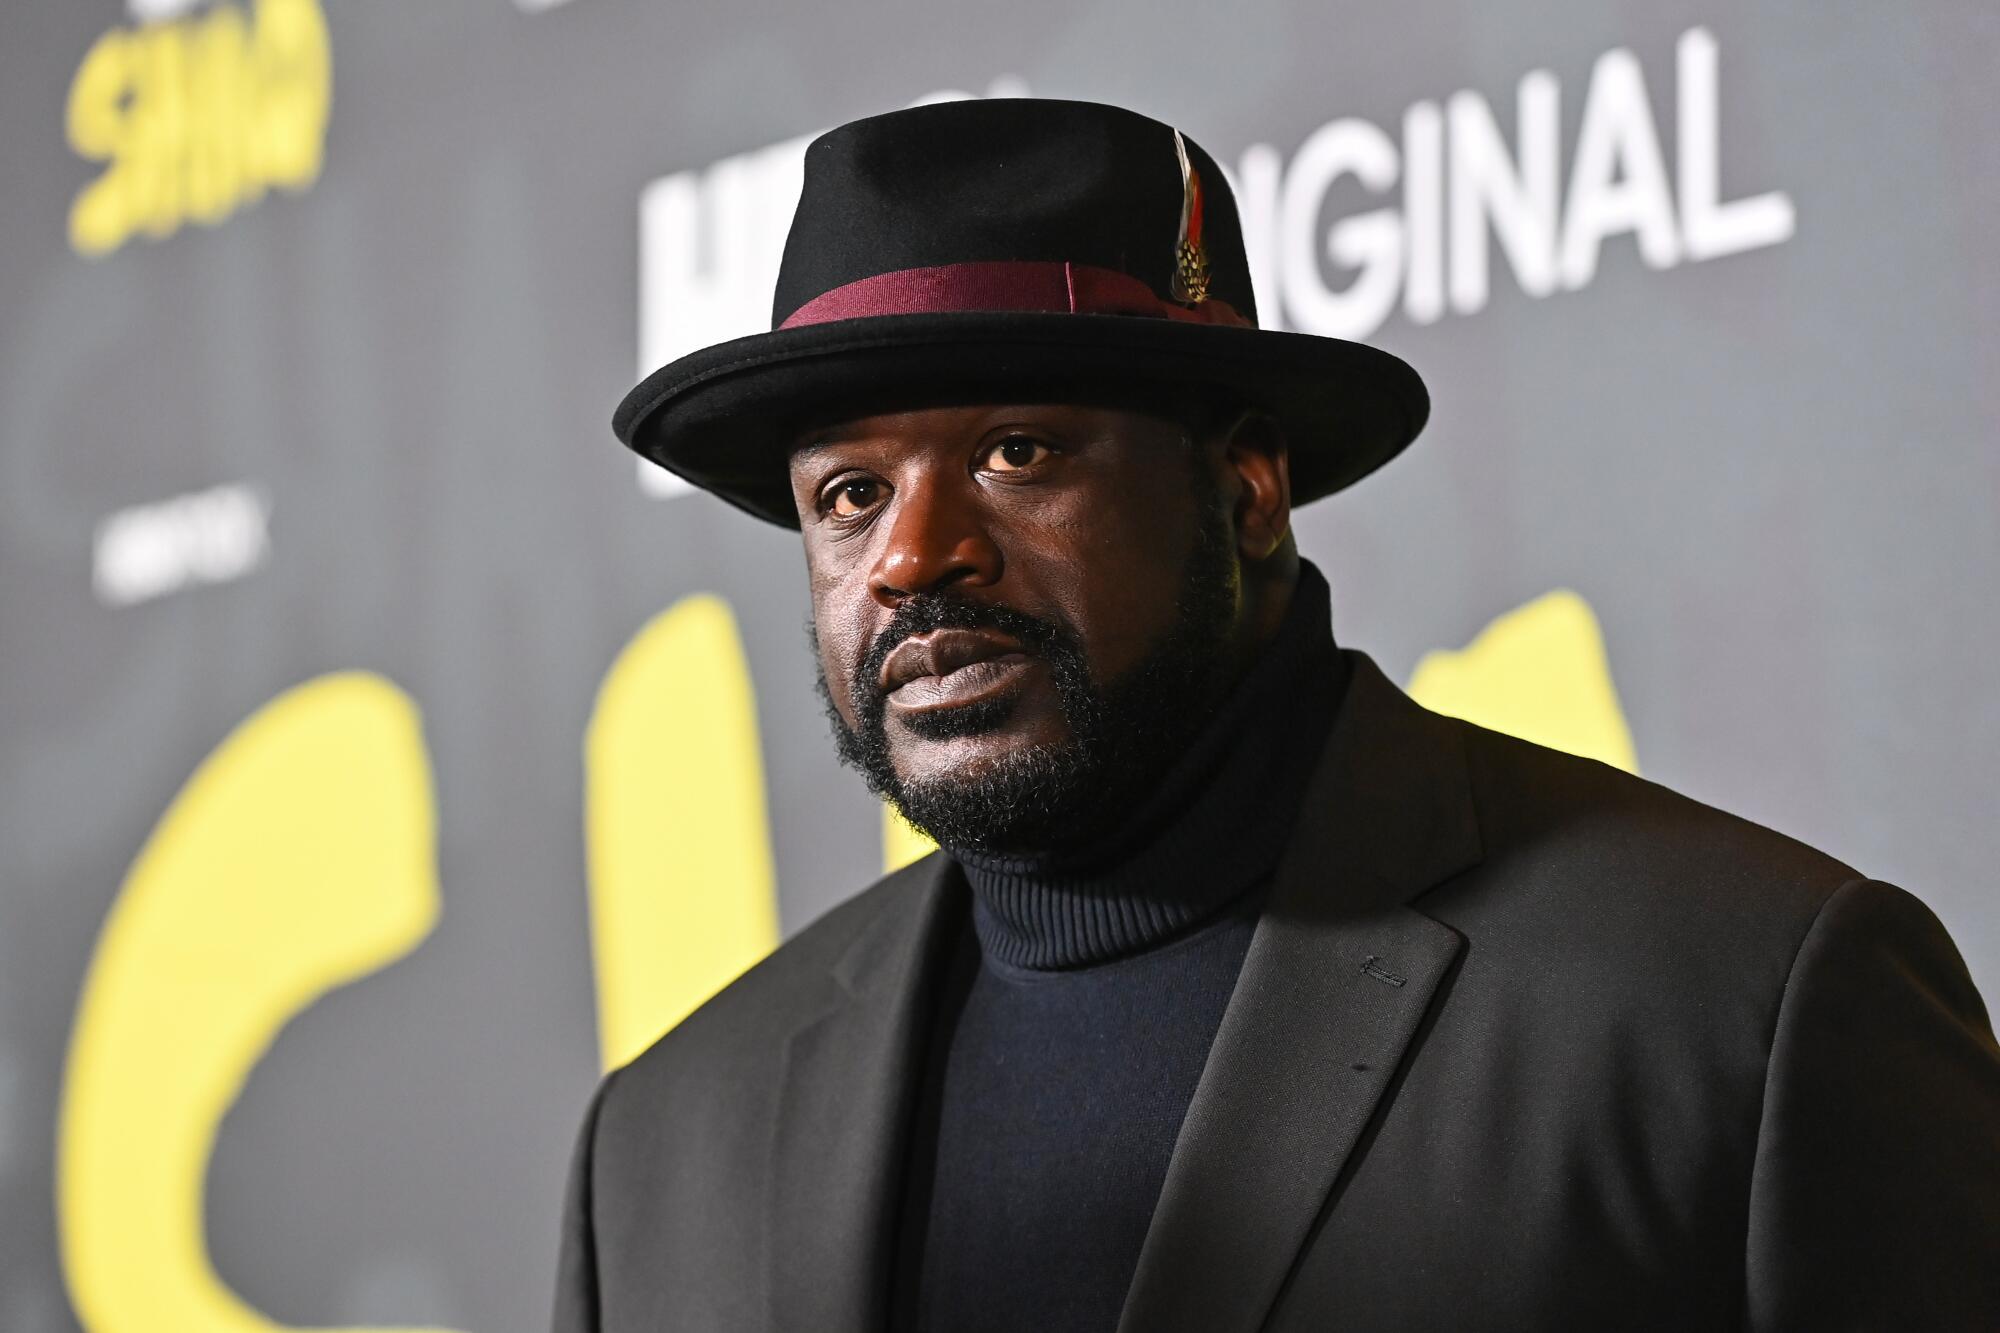 Shaquille O’Neal Invests In Campus, An Online College Start-Up, To Tackle Student Loan Debt Crisis